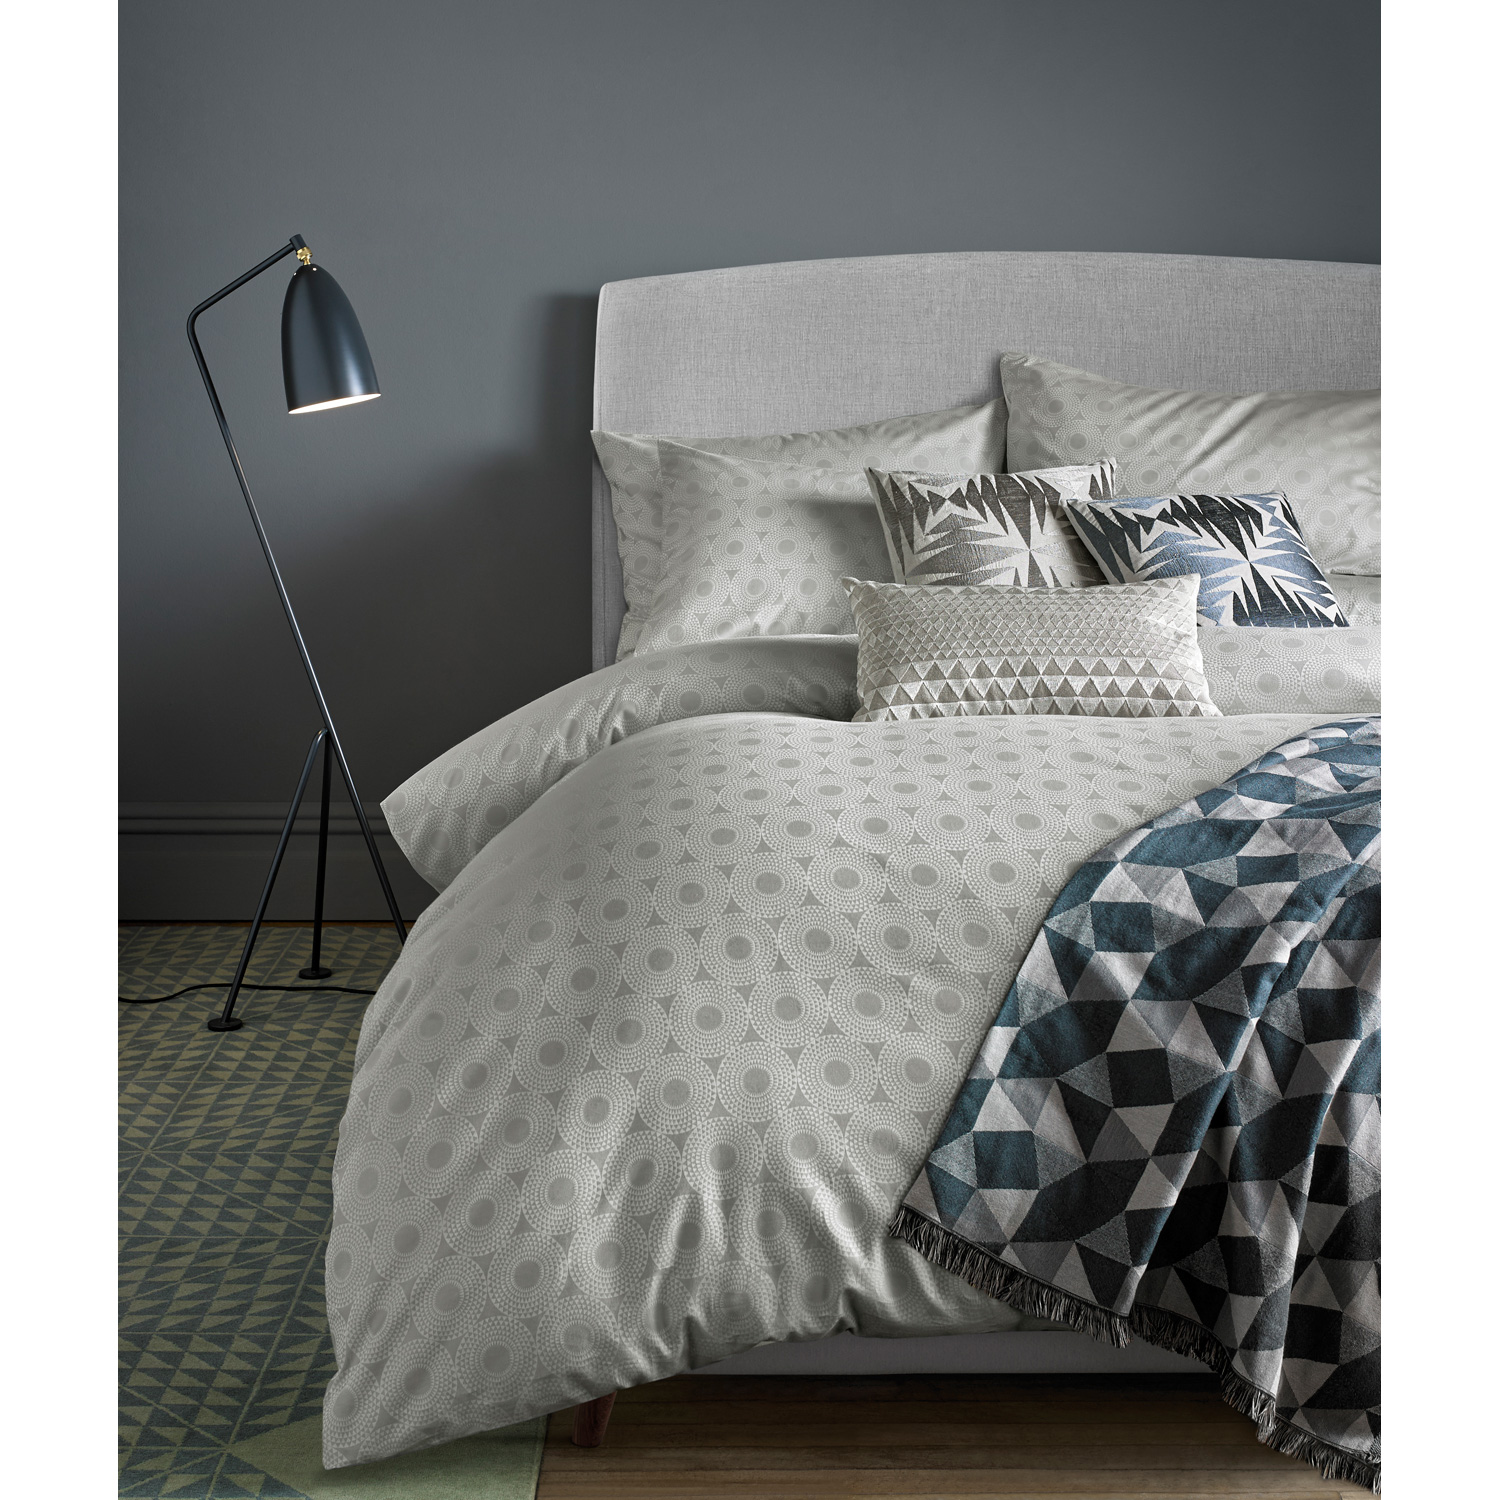 Bed linen concentric bed linen image ... GDBANDF